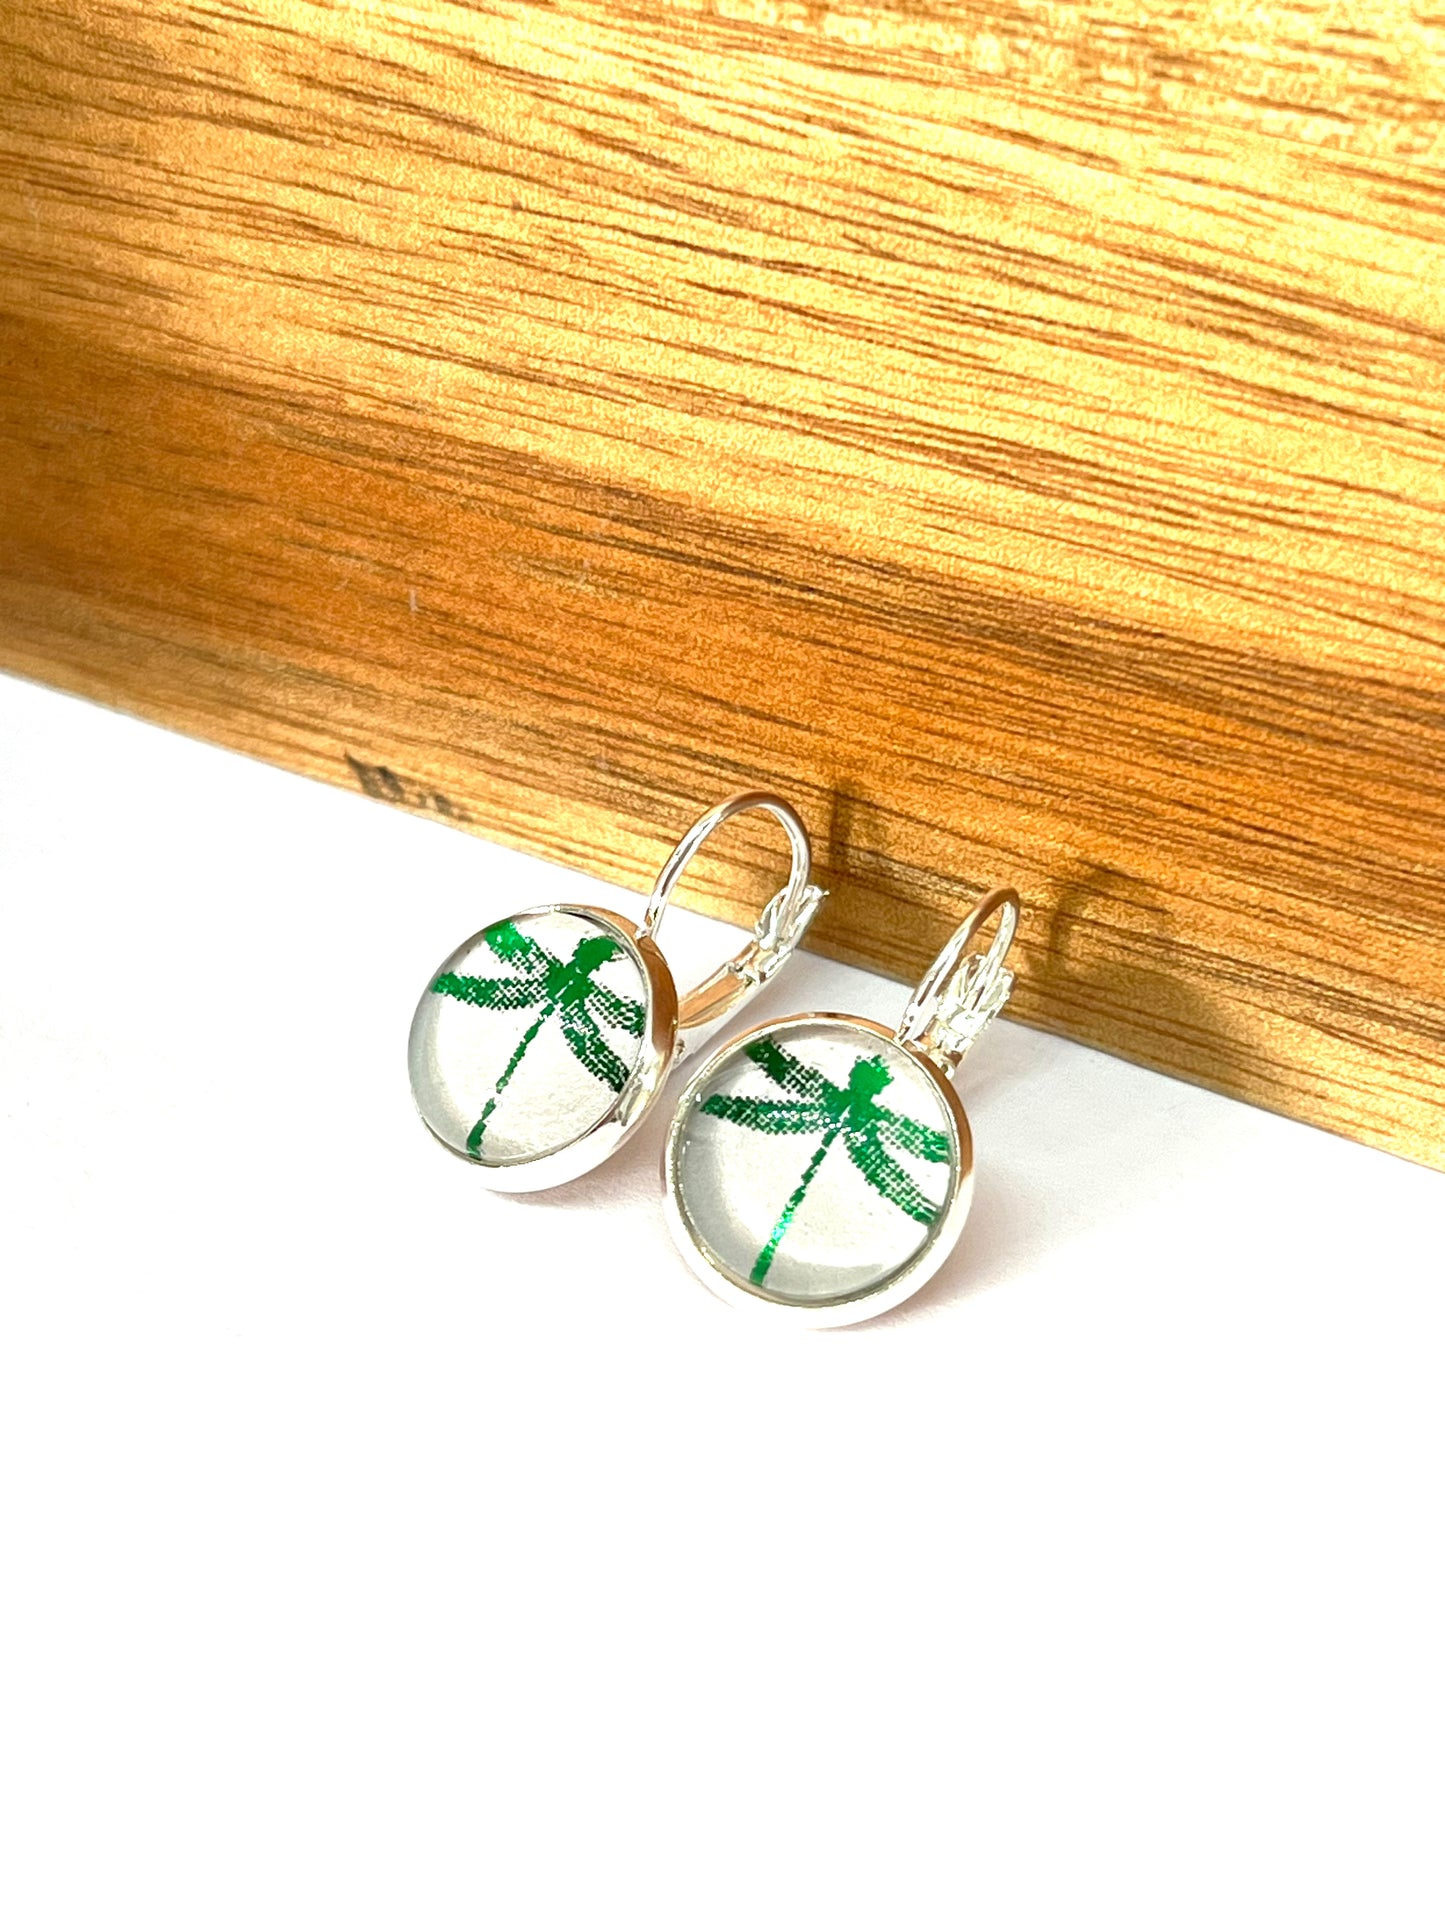 Emerald green metallic dragonfly glass dome earrings on a dove grey background